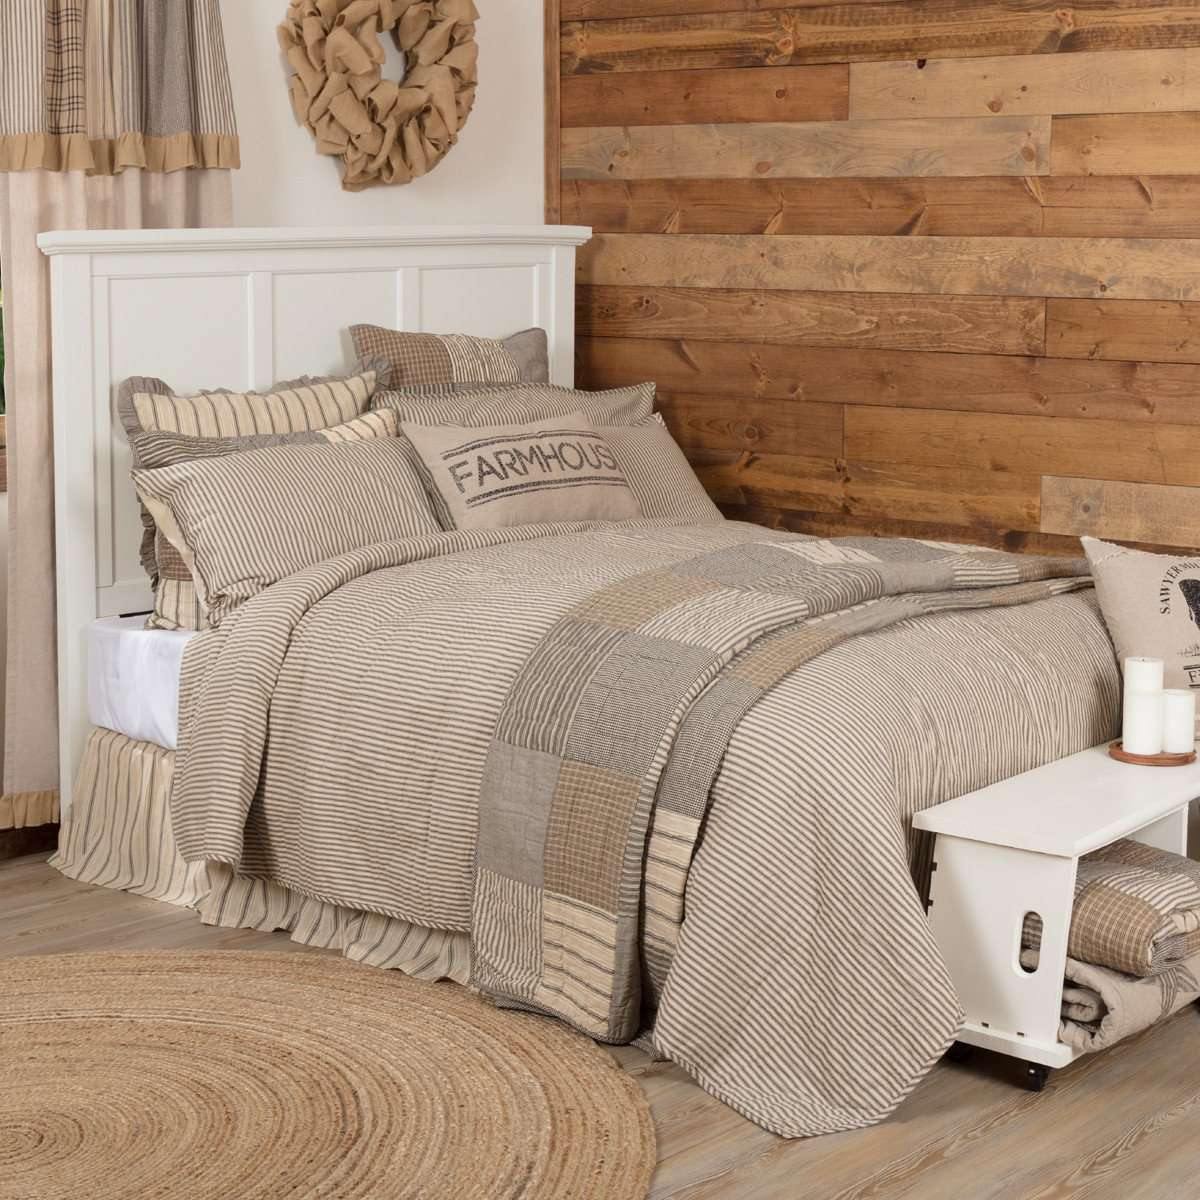 Sawyer Mill Charcoal Ticking Stripe Quilt Coverlet VHC Brands side 